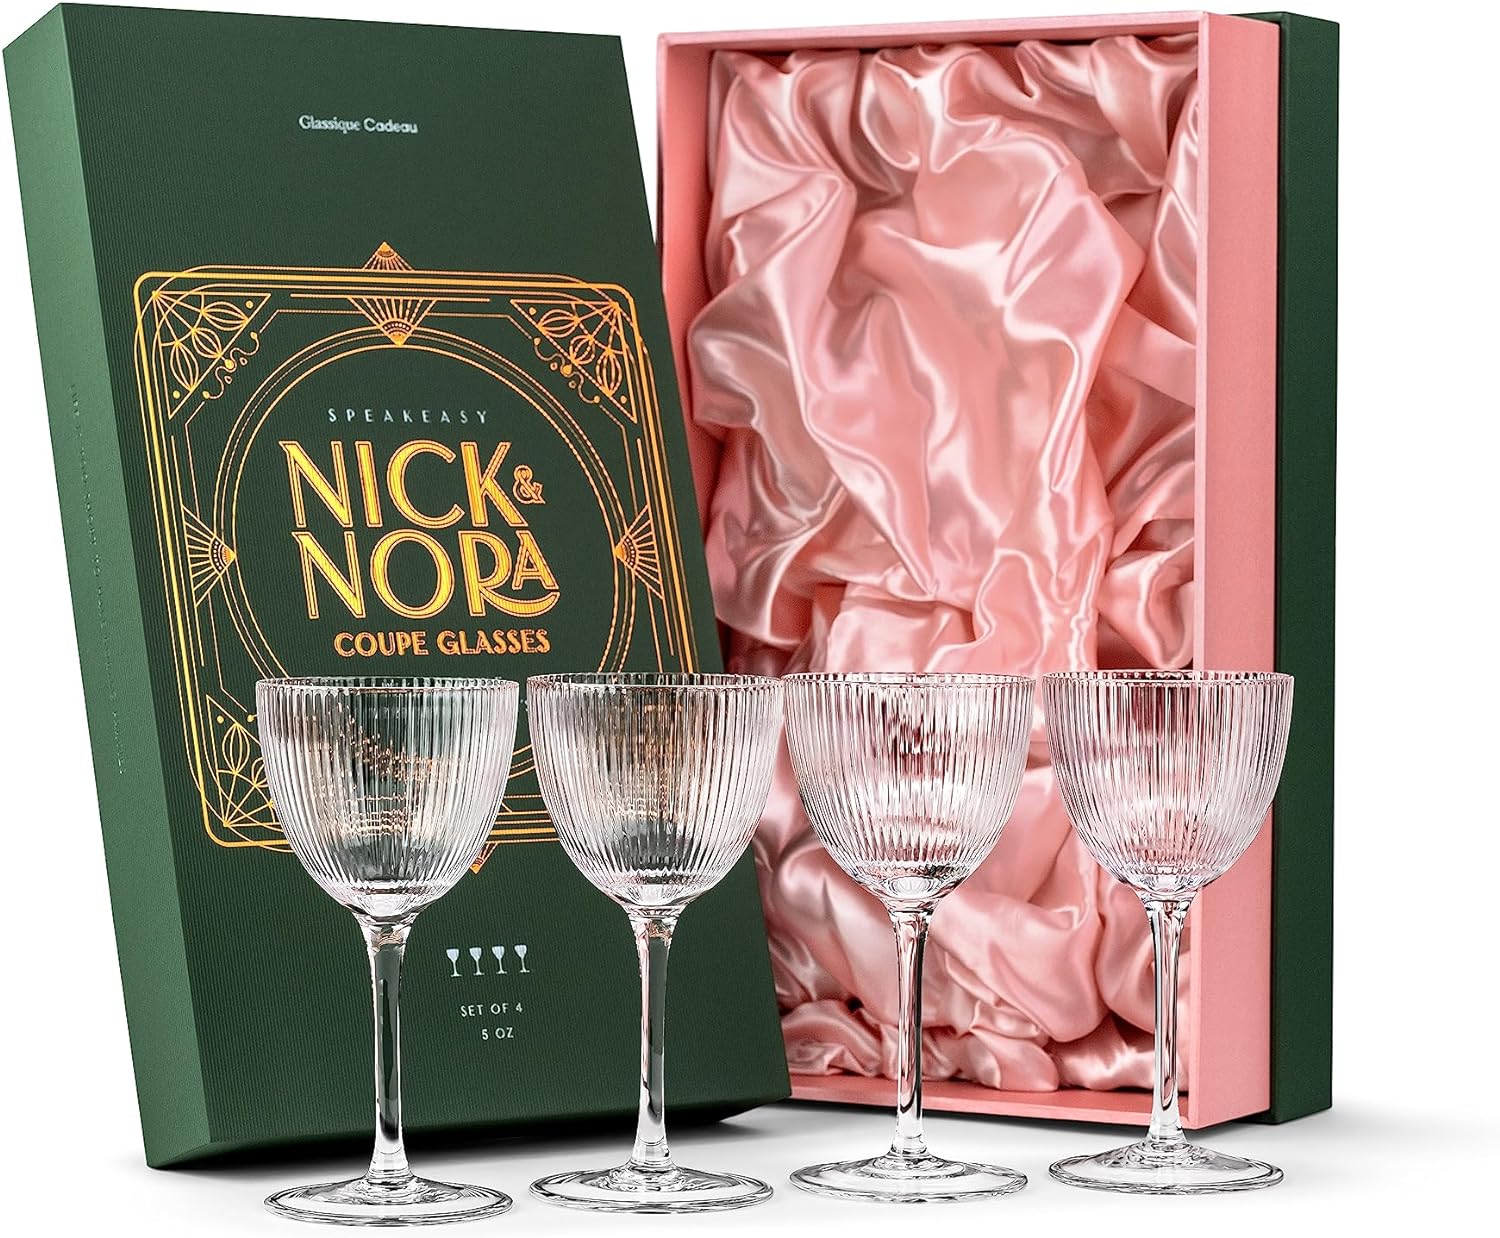 Vintage Art Deco Nick and Nora Coupe Glasses | Set of 4 | 5 oz Crystal Ribbed Cocktail Glassware for Drinking Classic Gin, Whiskey, Vodka Bar Drinks | Retro Long Stemmed Barware Goblets